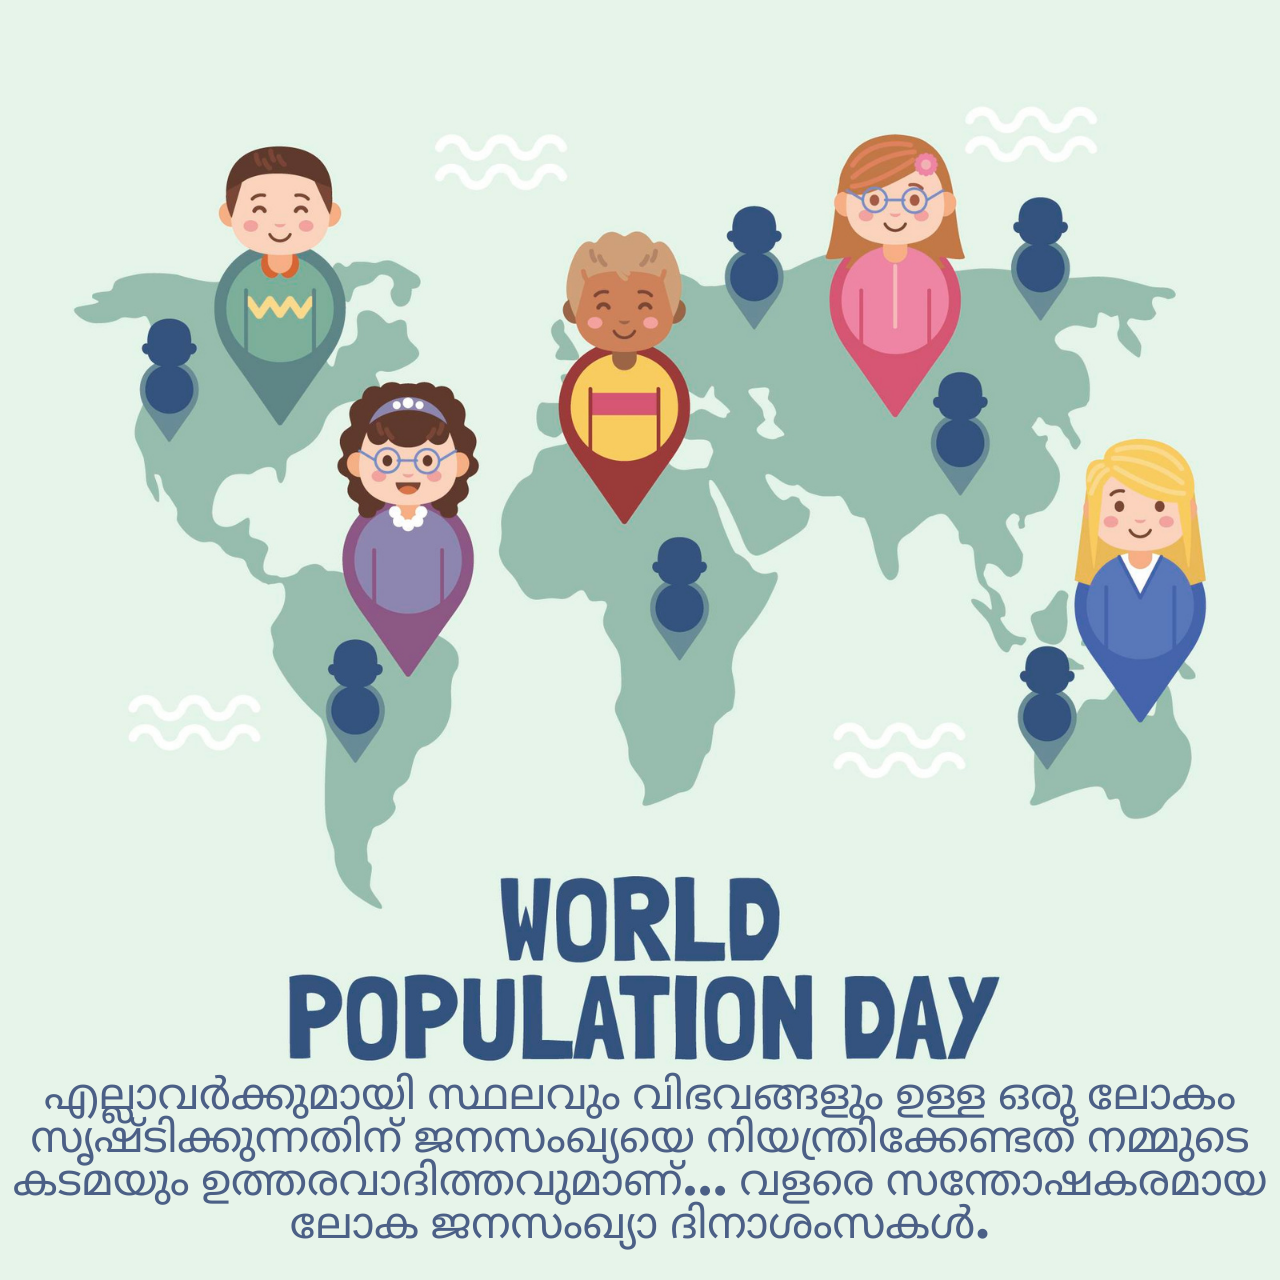 World Population Day 2021: Telugu and Malayalam Quotes, Slogans, Messages, and Status to spread awareness about Overpopulation issues